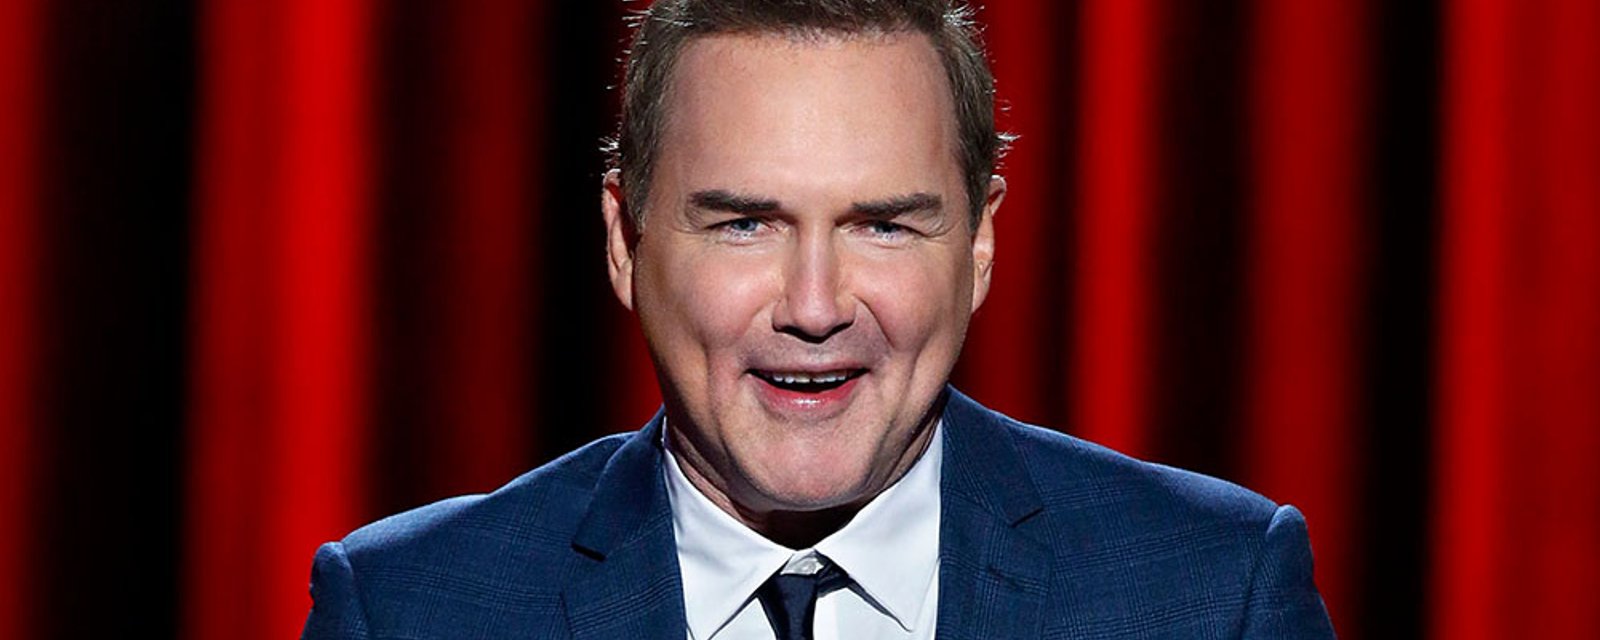 Noted hockey fan and comedian Norm Macdonald dies at 61 